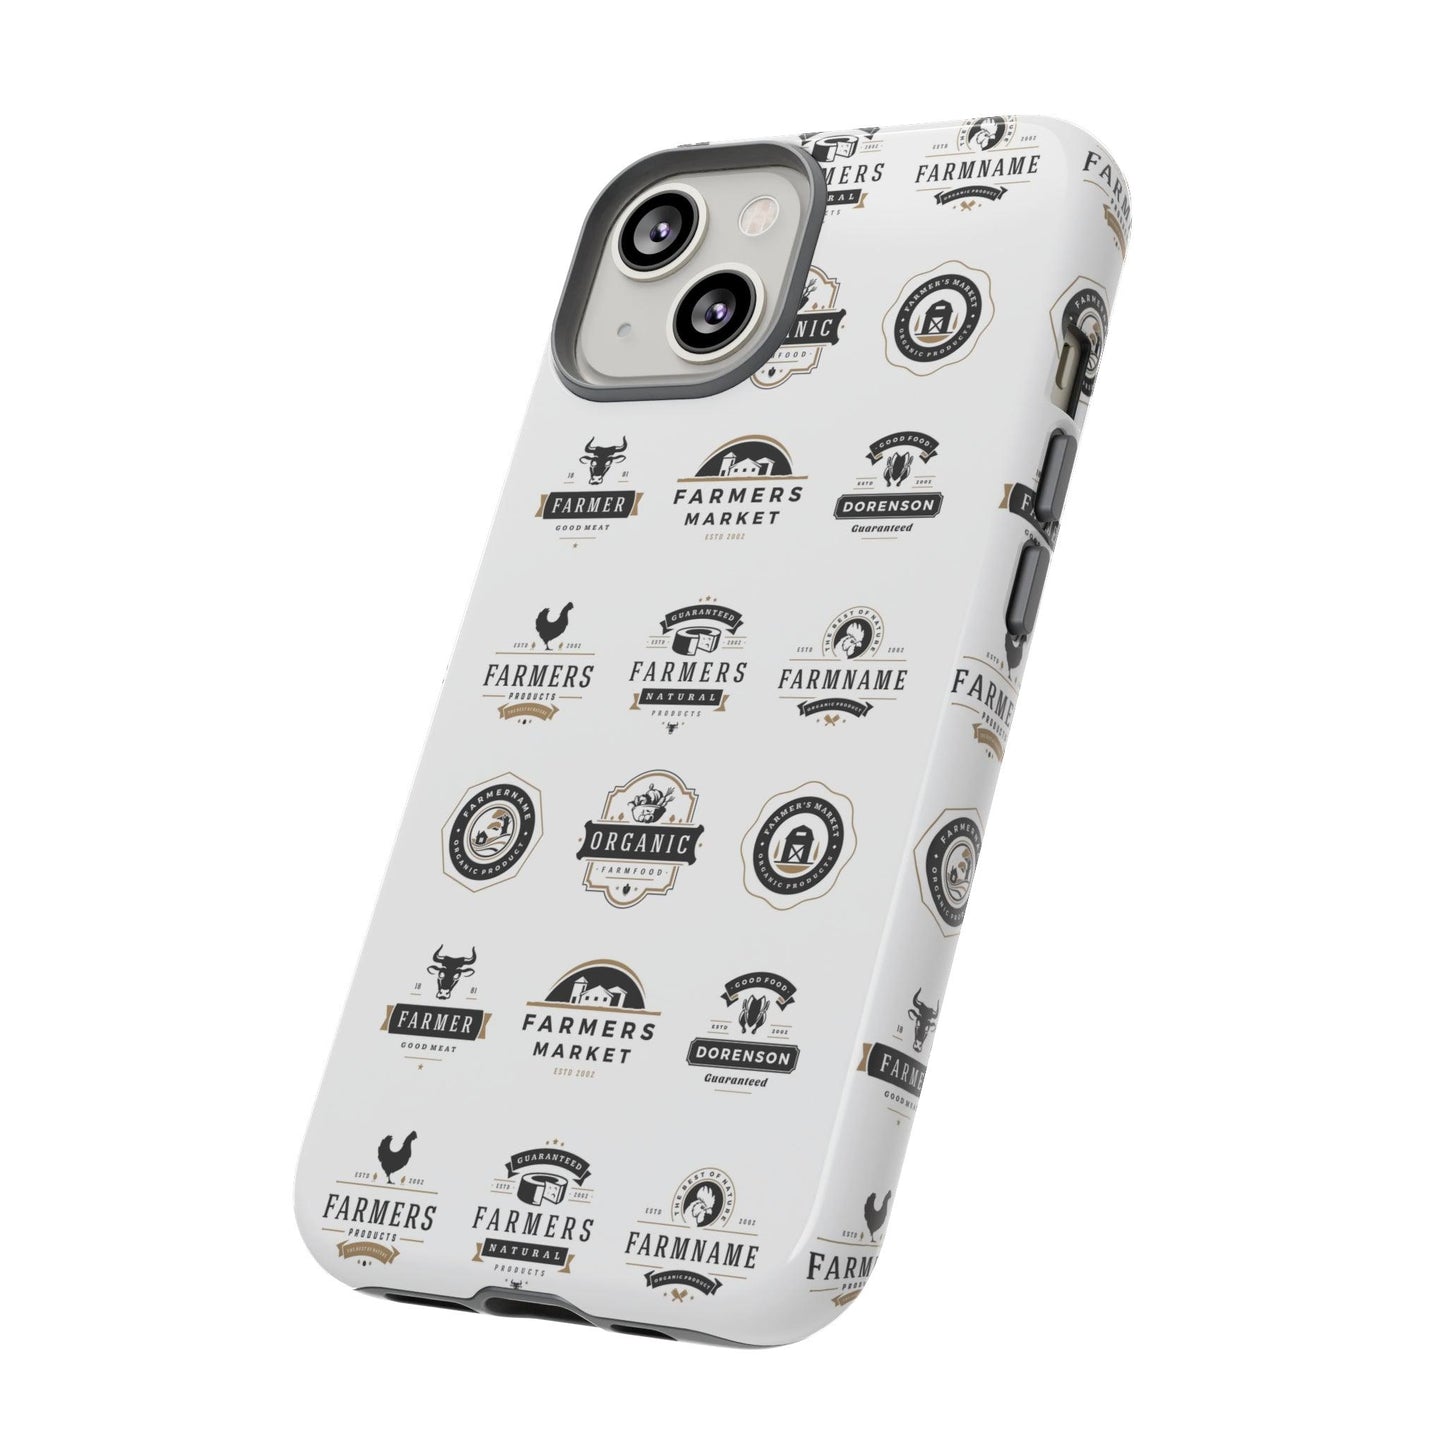 Farm to Fork Tough CasesPersonalize Apple iPhone, Samsung Galaxy, and Google Pixel devices with premium-quality custom protective phone cases. Every case has double layers for extra durabilFork Tough CasesThe Hufeisen-Ranch (WYO Wagyu)Phone Case